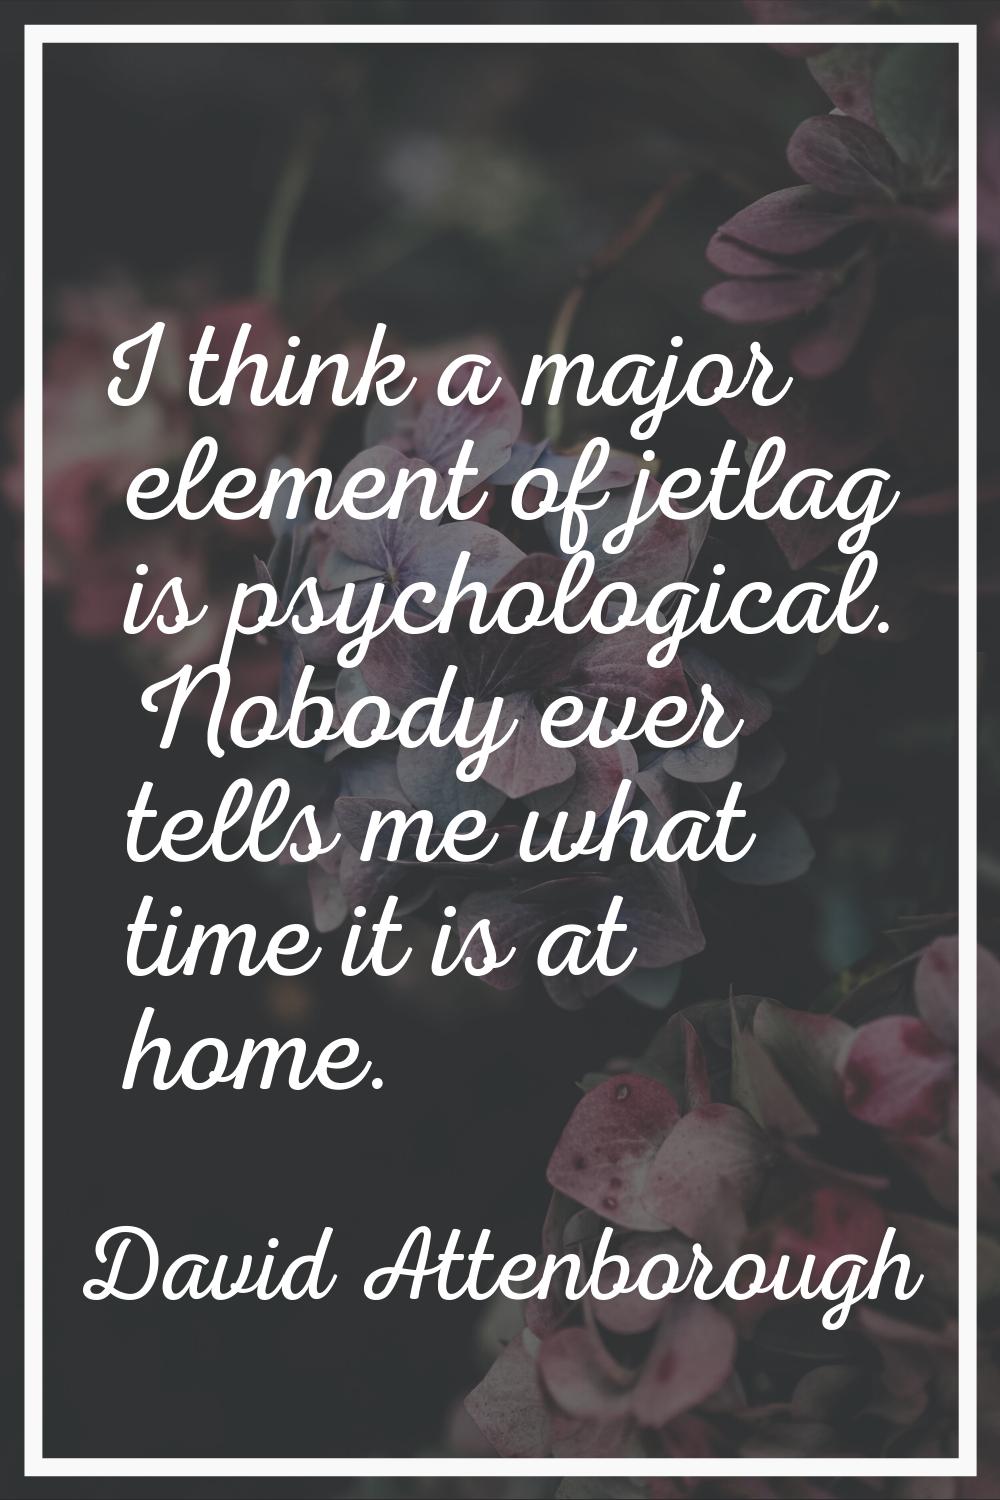 I think a major element of jetlag is psychological. Nobody ever tells me what time it is at home.